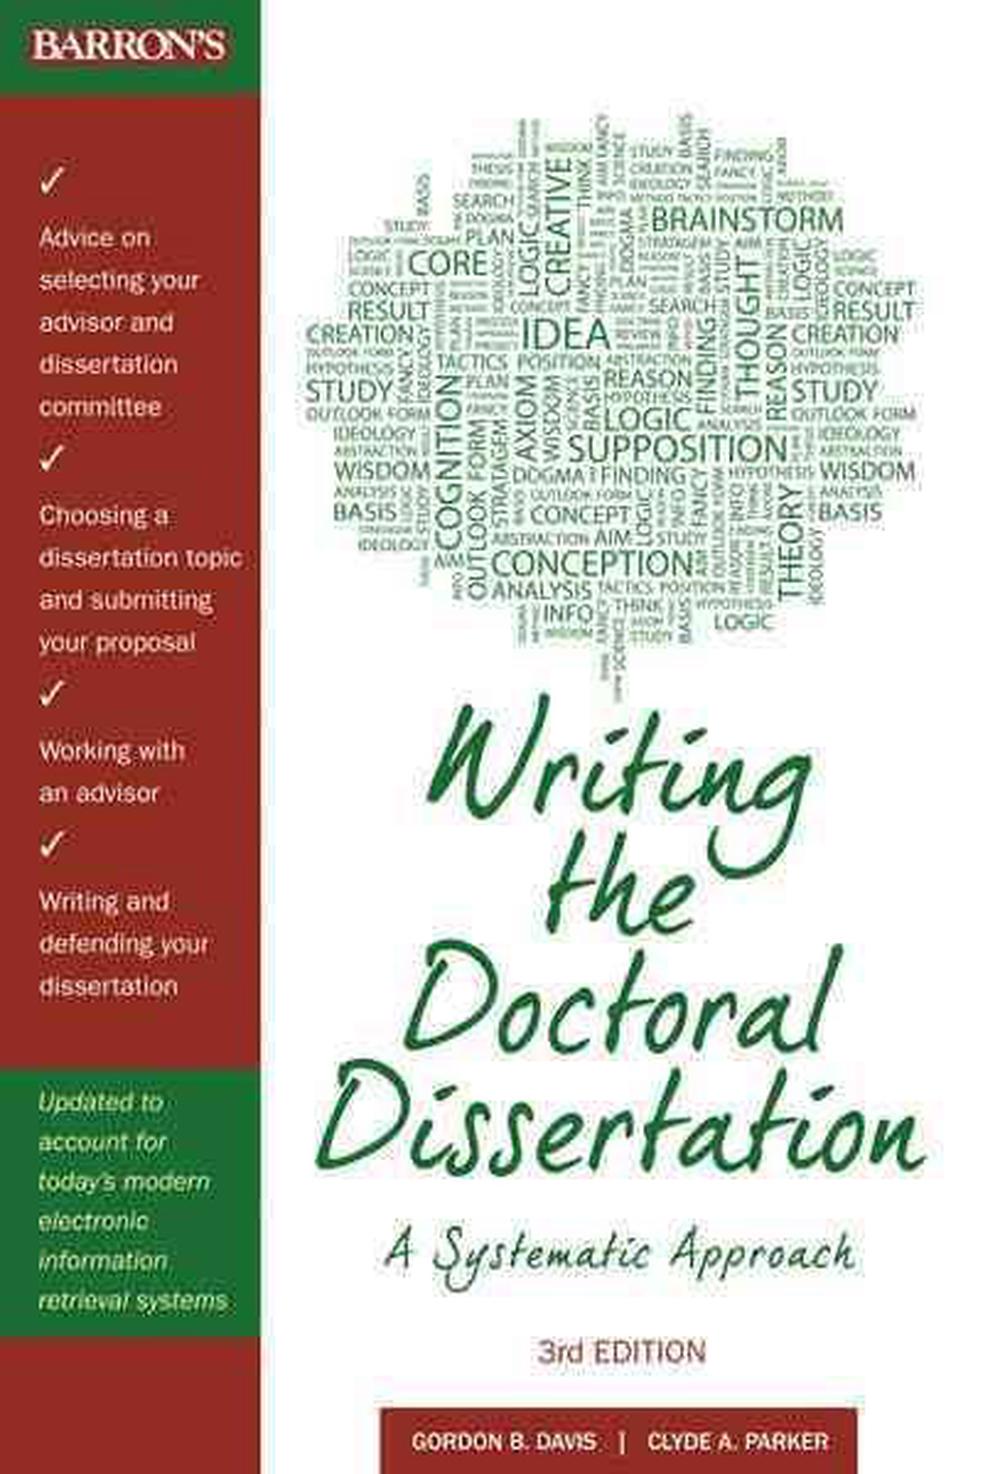 Book dissertation from